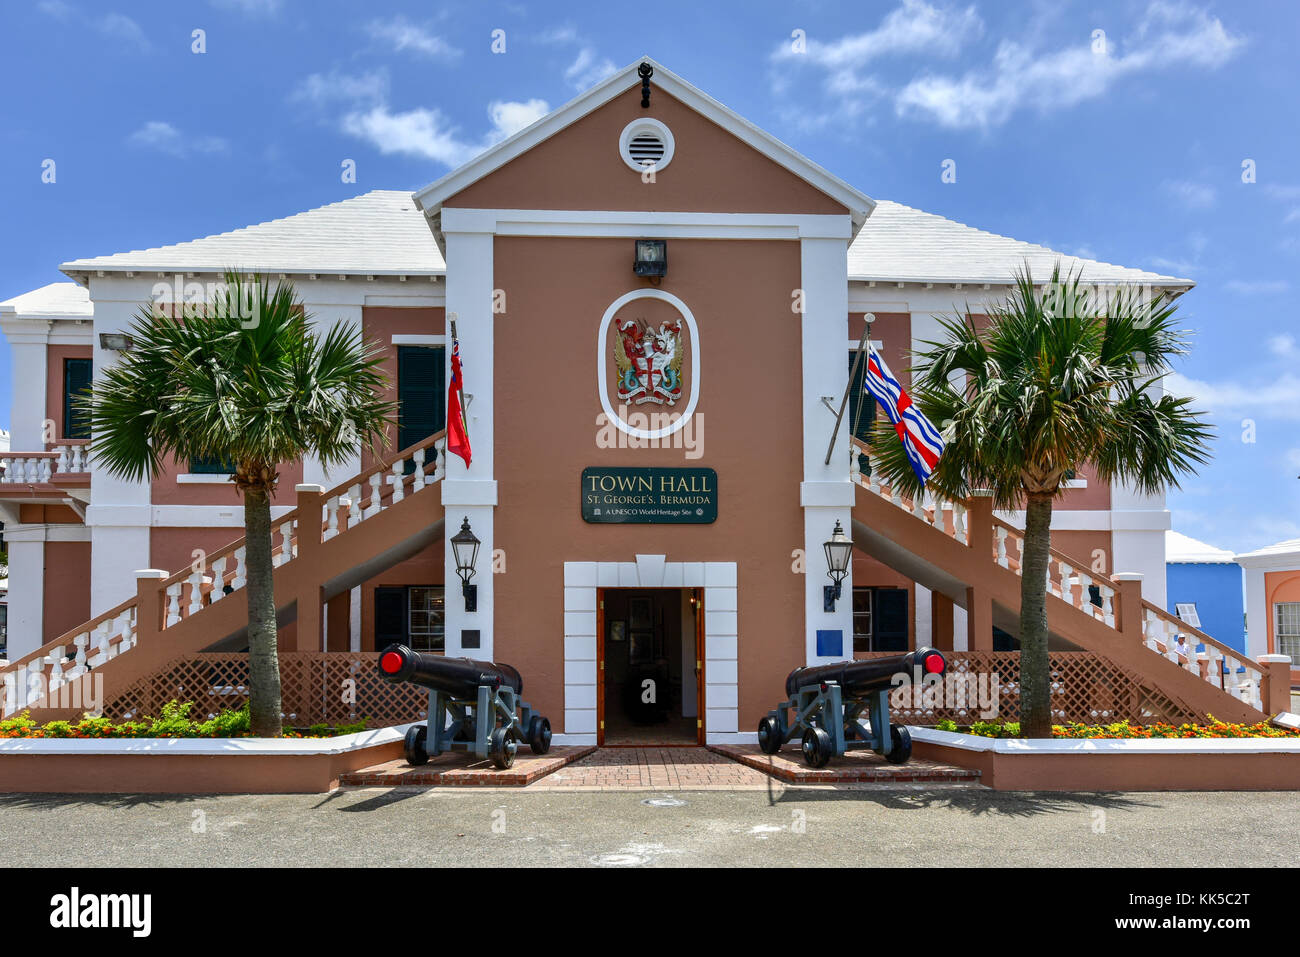 Saint George's Town Hall located at the eastern side of King's Square in St. Georges Bermuda. The building was originally constructed in 1782 during t Stock Photo